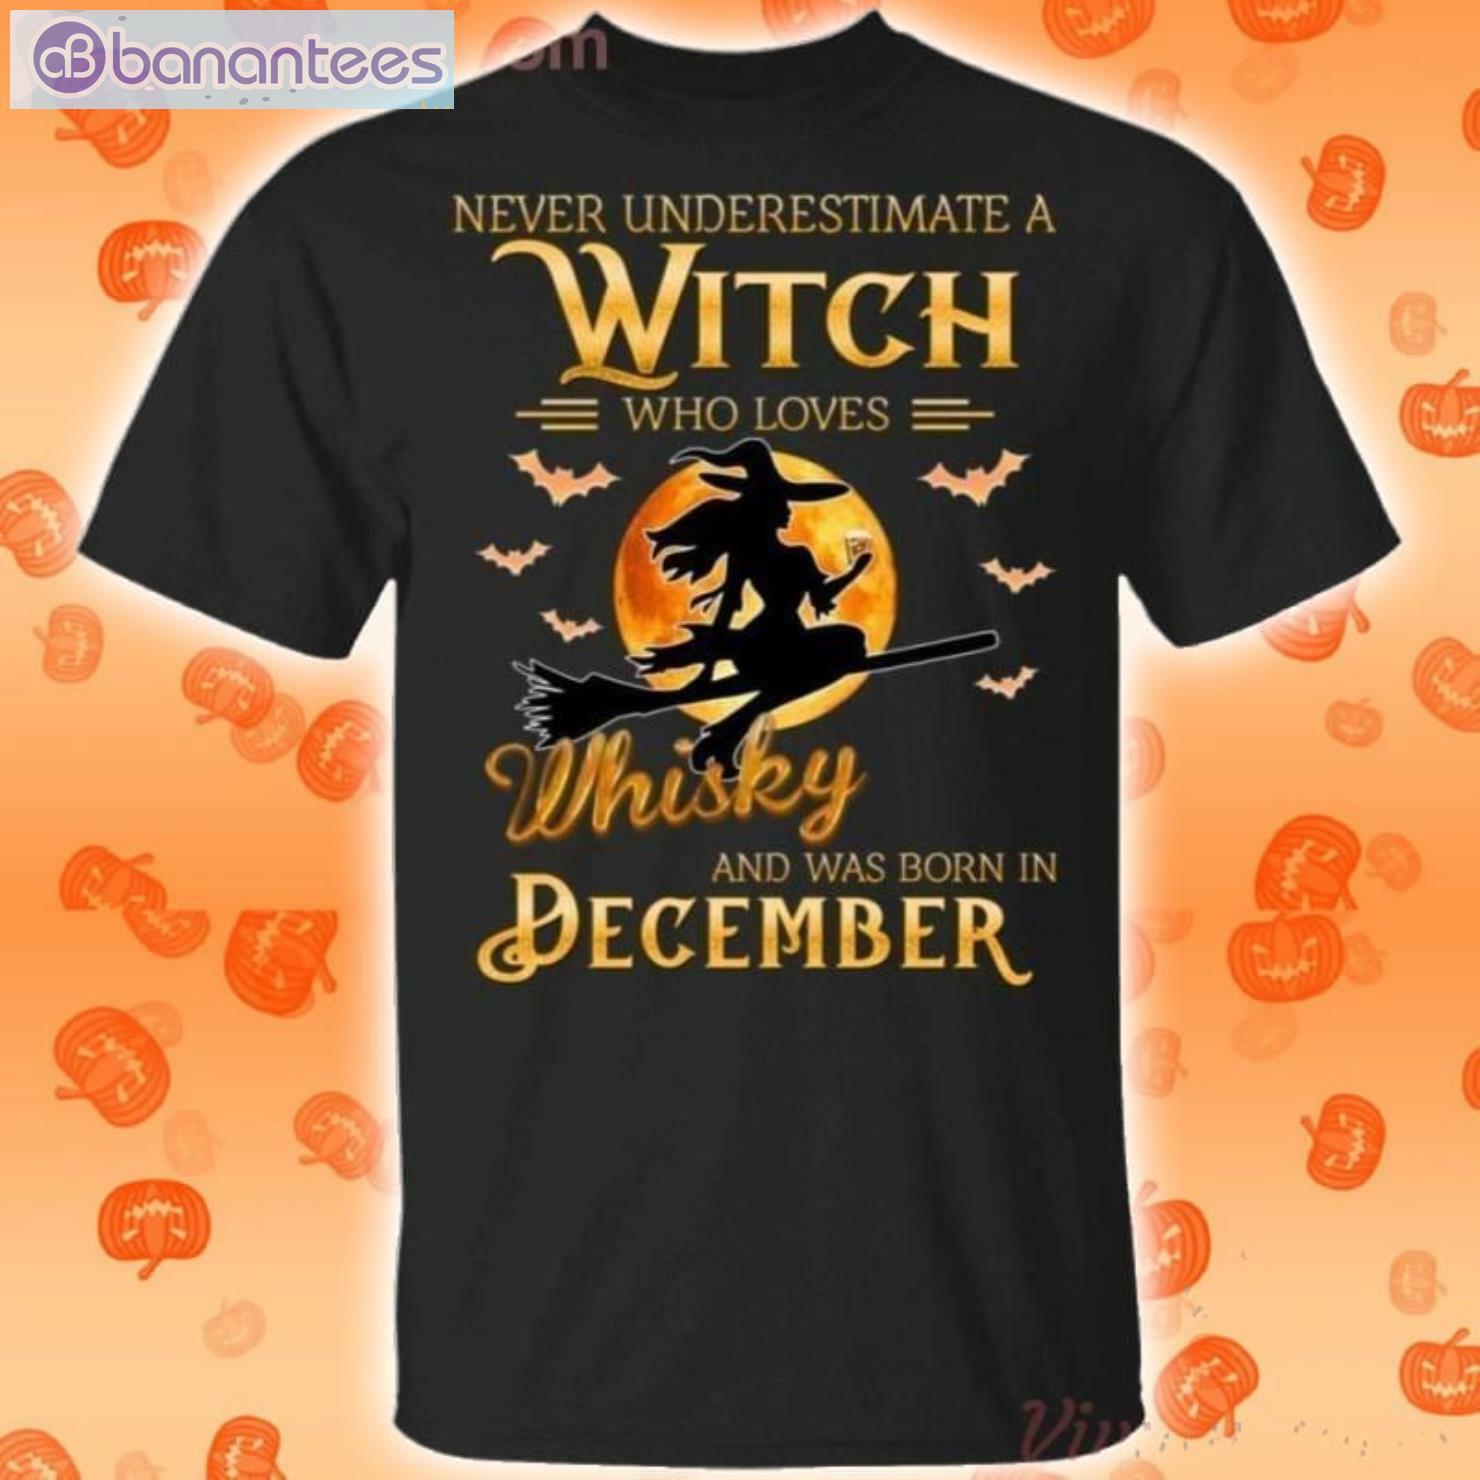 https://www.banantees.com/wp-content/uploads/2022/08/never-underestimate-a-december-witch-who-loves-whisky-birthday-halloween-t-shirt.jpg